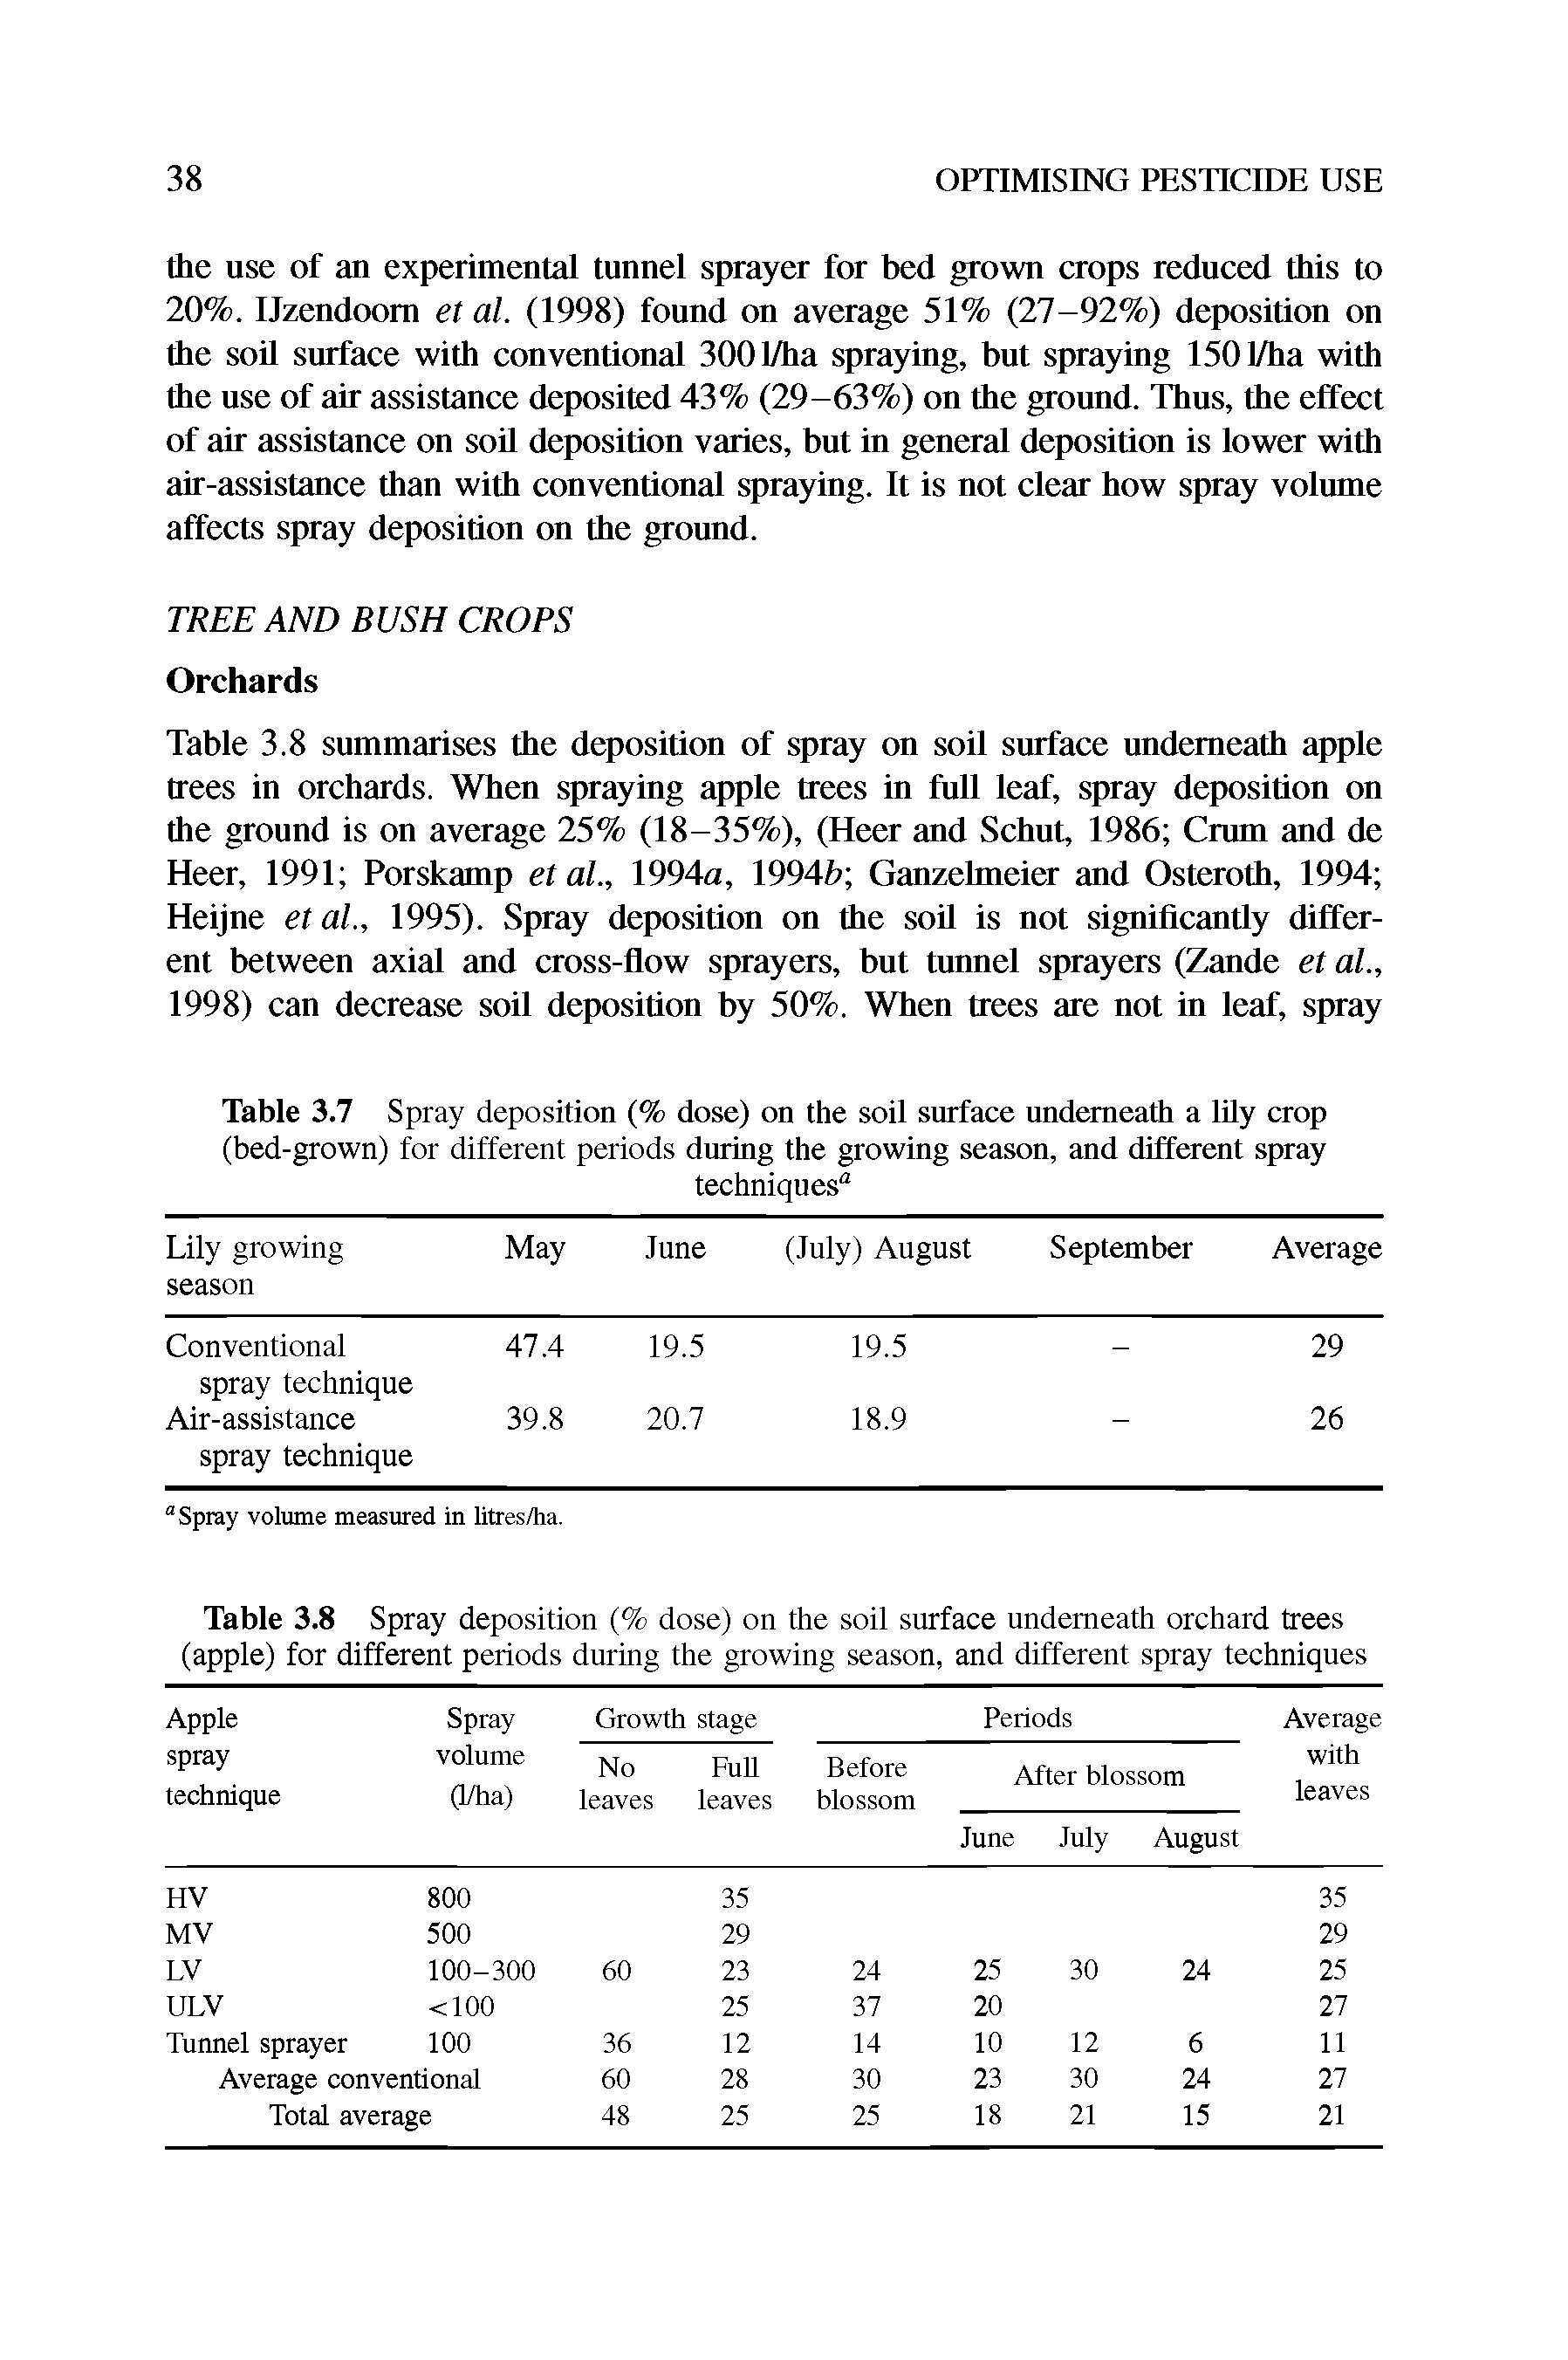 Table 3.8 Spray deposition (% dose) on the soil surface underneath orchard trees (apple) for different periods during the growing season, and different spray techniques...